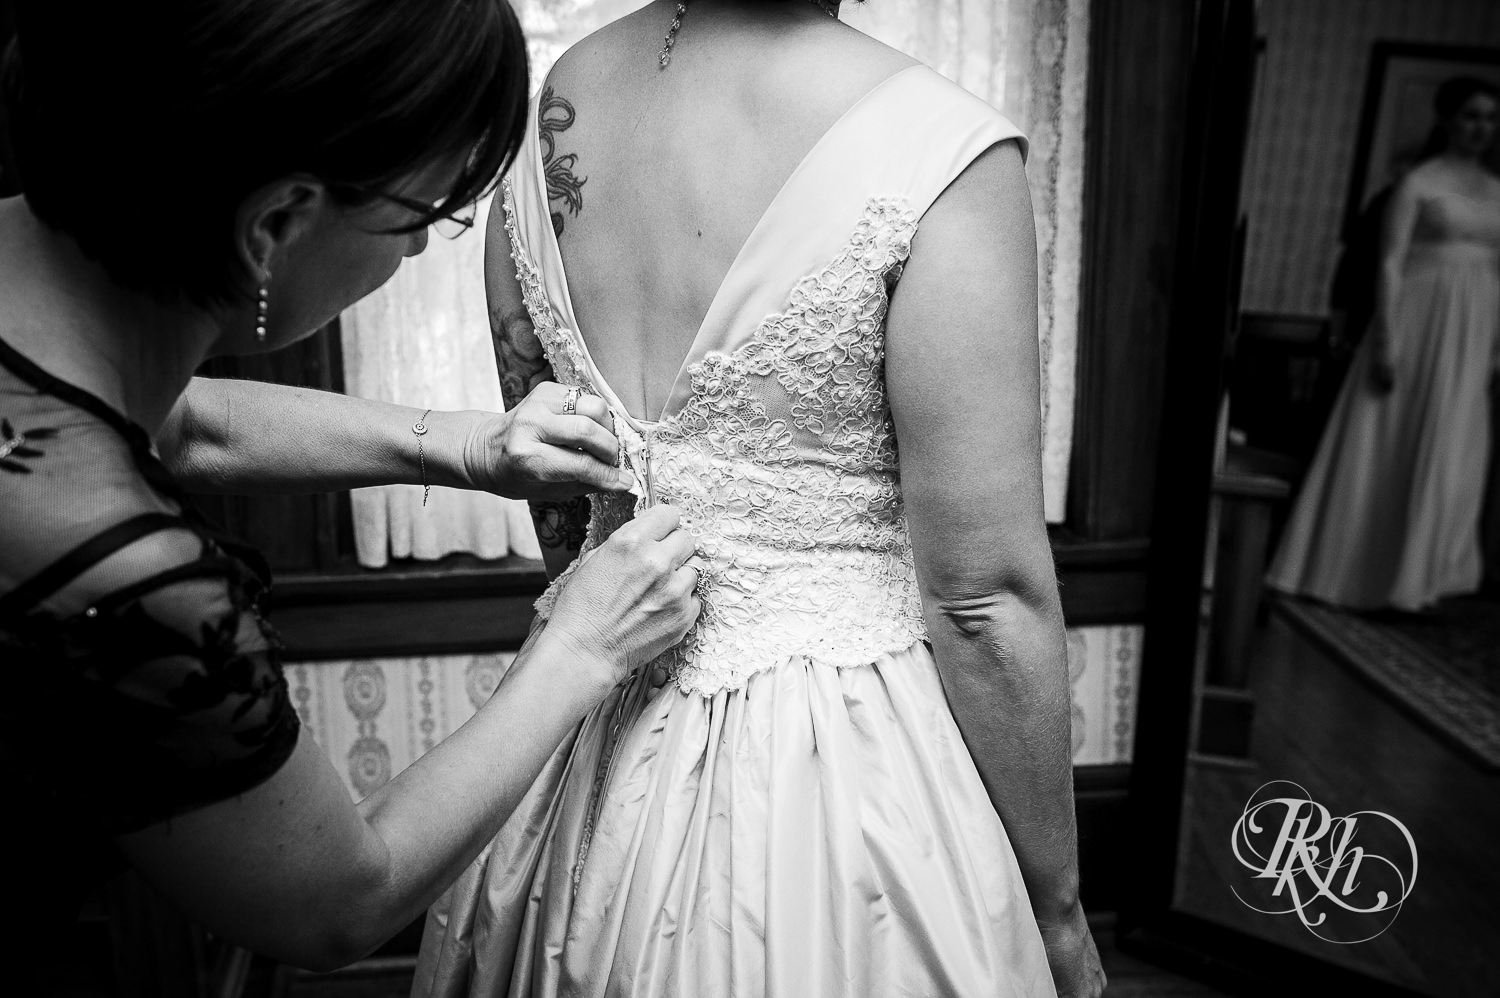 Bride getting buttoned into wedding dress at Summit Manor Reception House in Saint Paul, Minnesota.